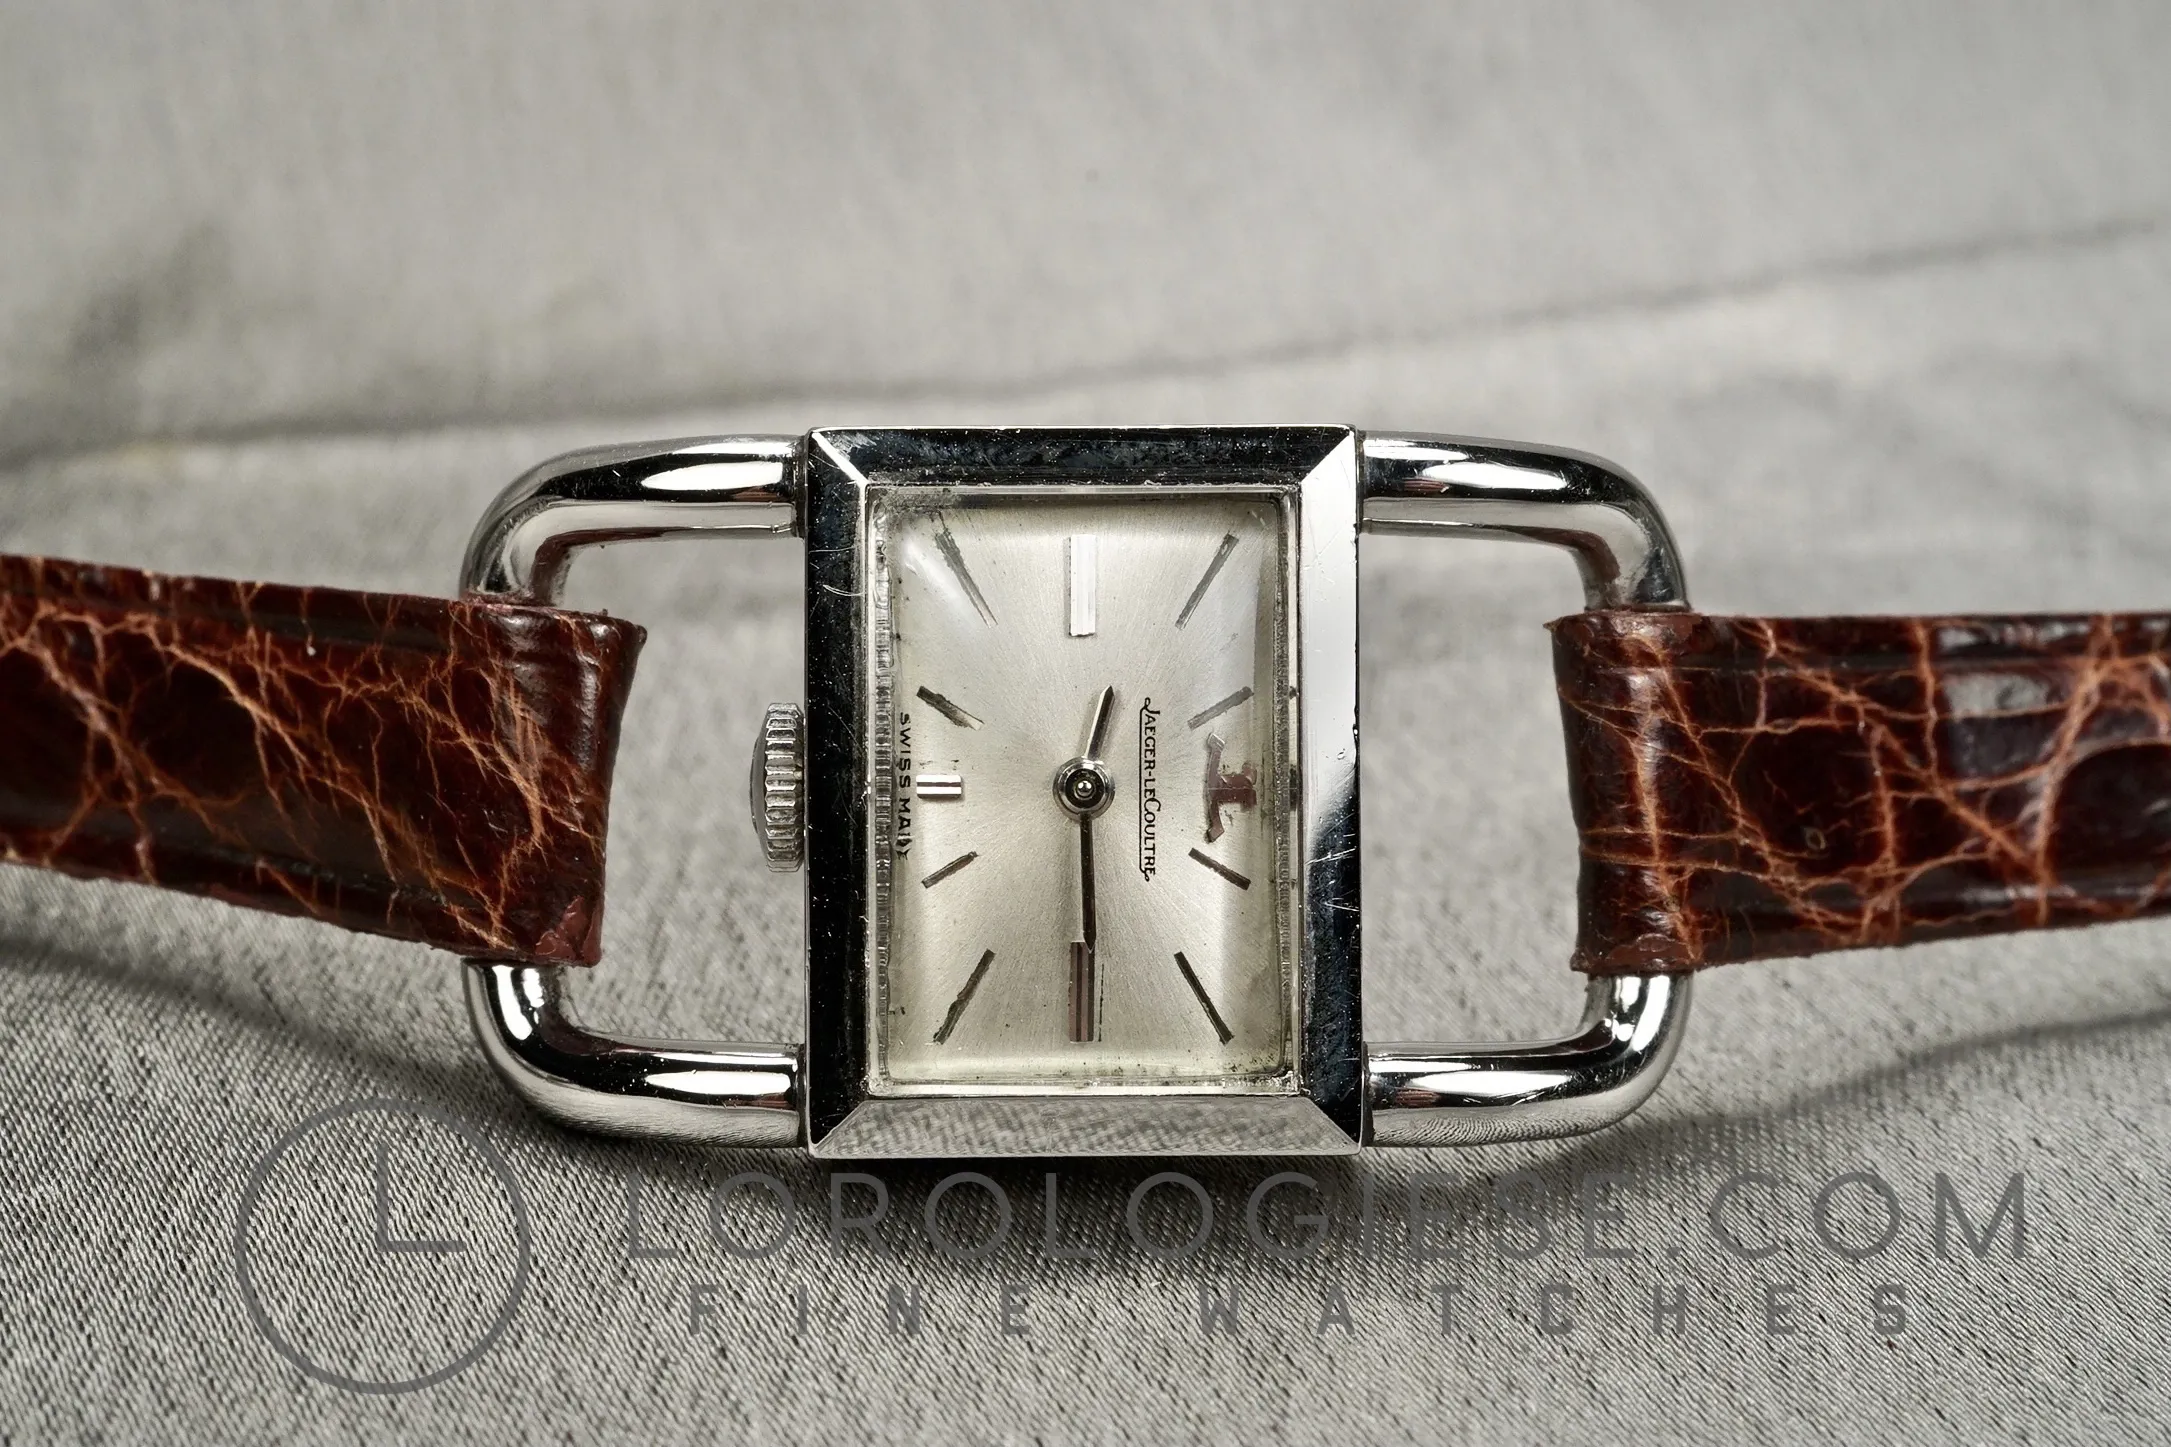 Jaeger-LeCoultre Étrier 1670 20mm Stainless steel Silvered 12